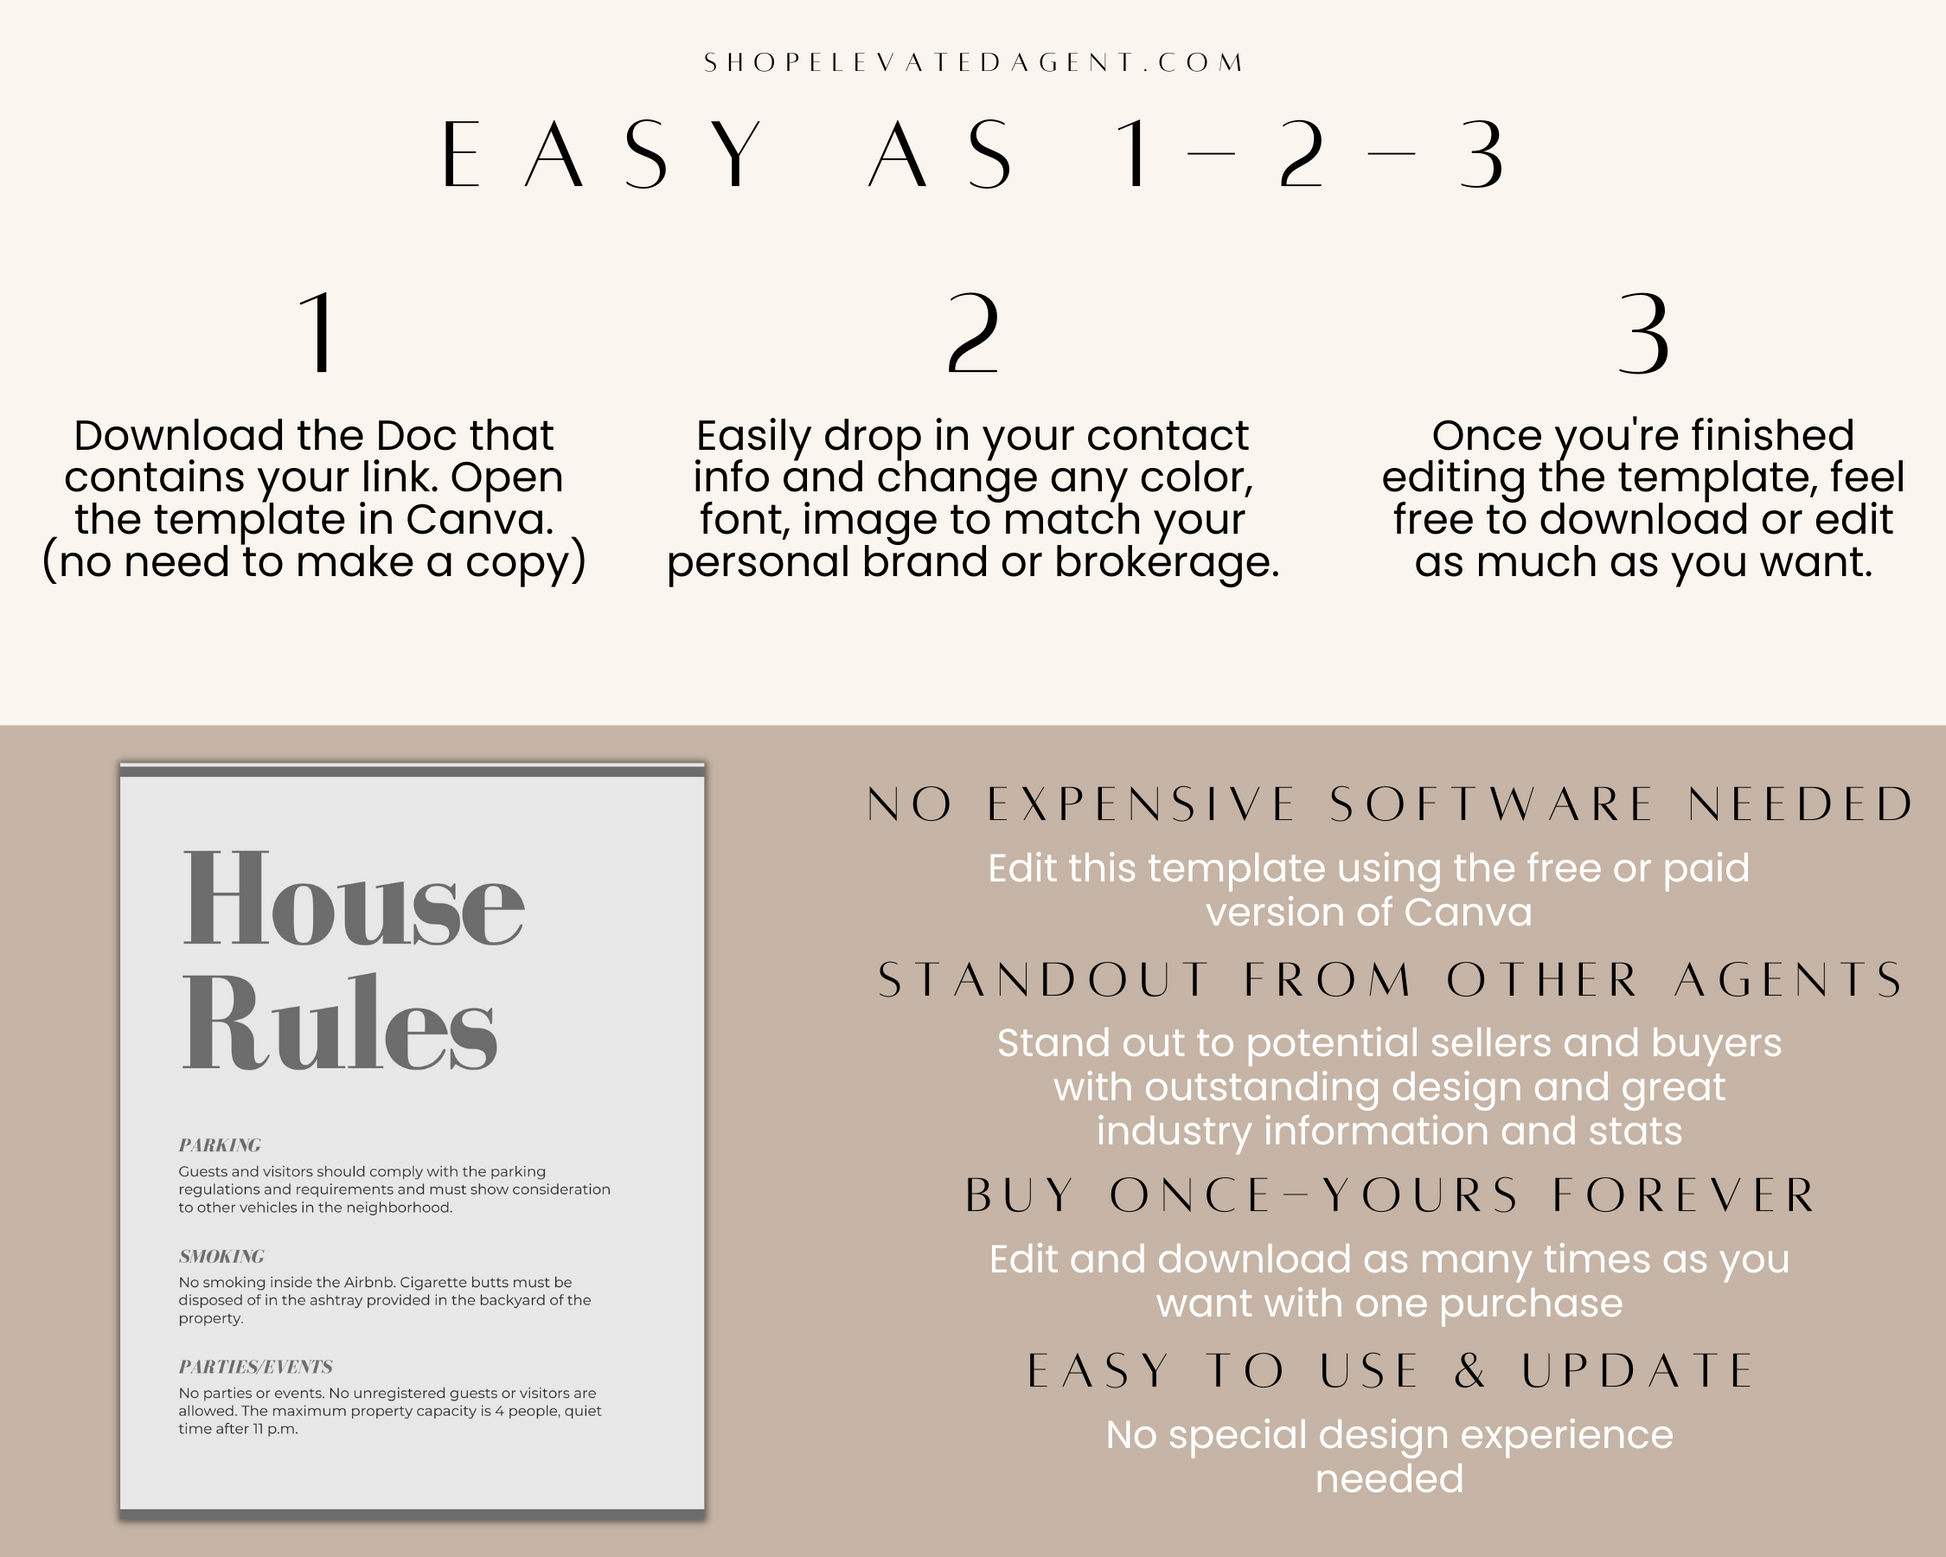 Real Estate Template – House Rules Airbnb Sign